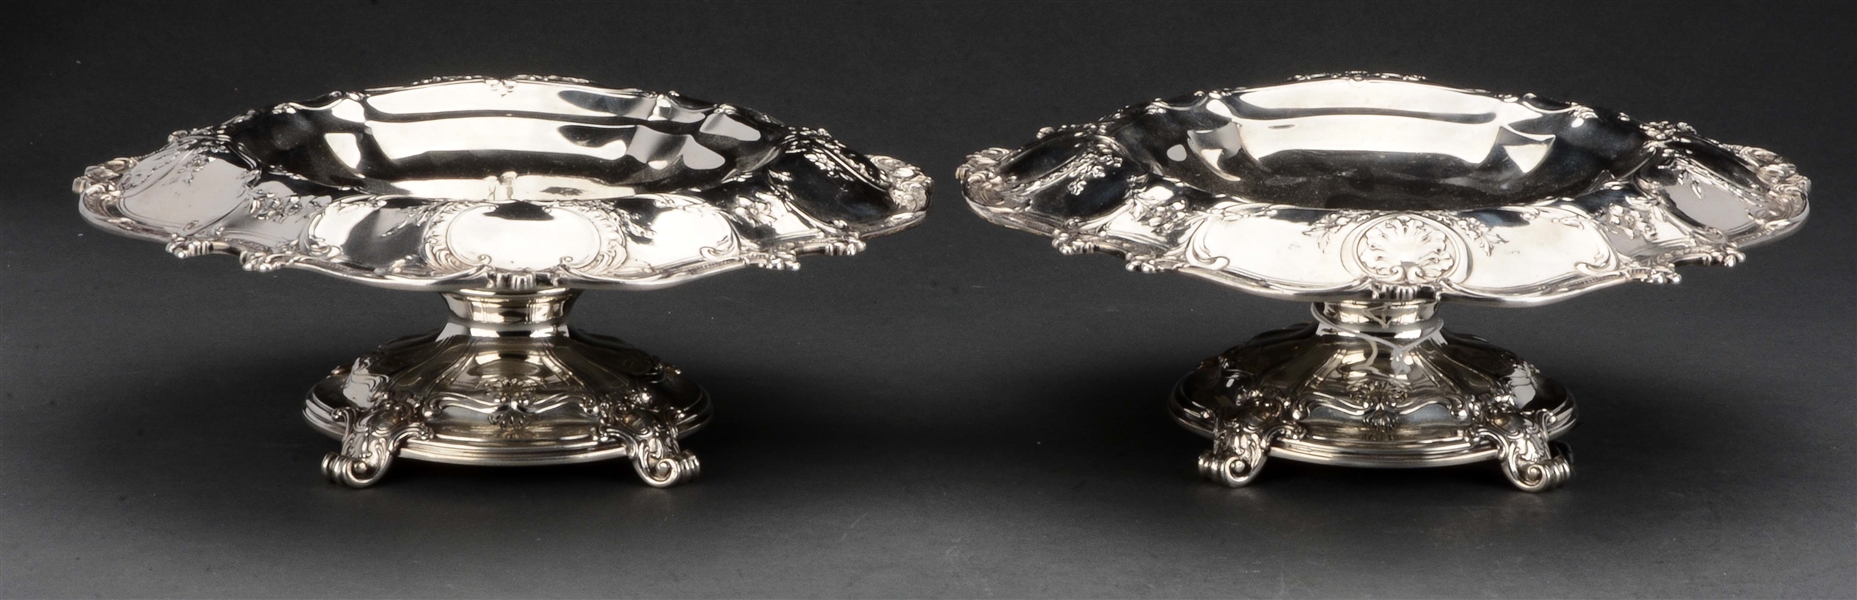 PAIR OF GORHAM STERLING COMPOTES.